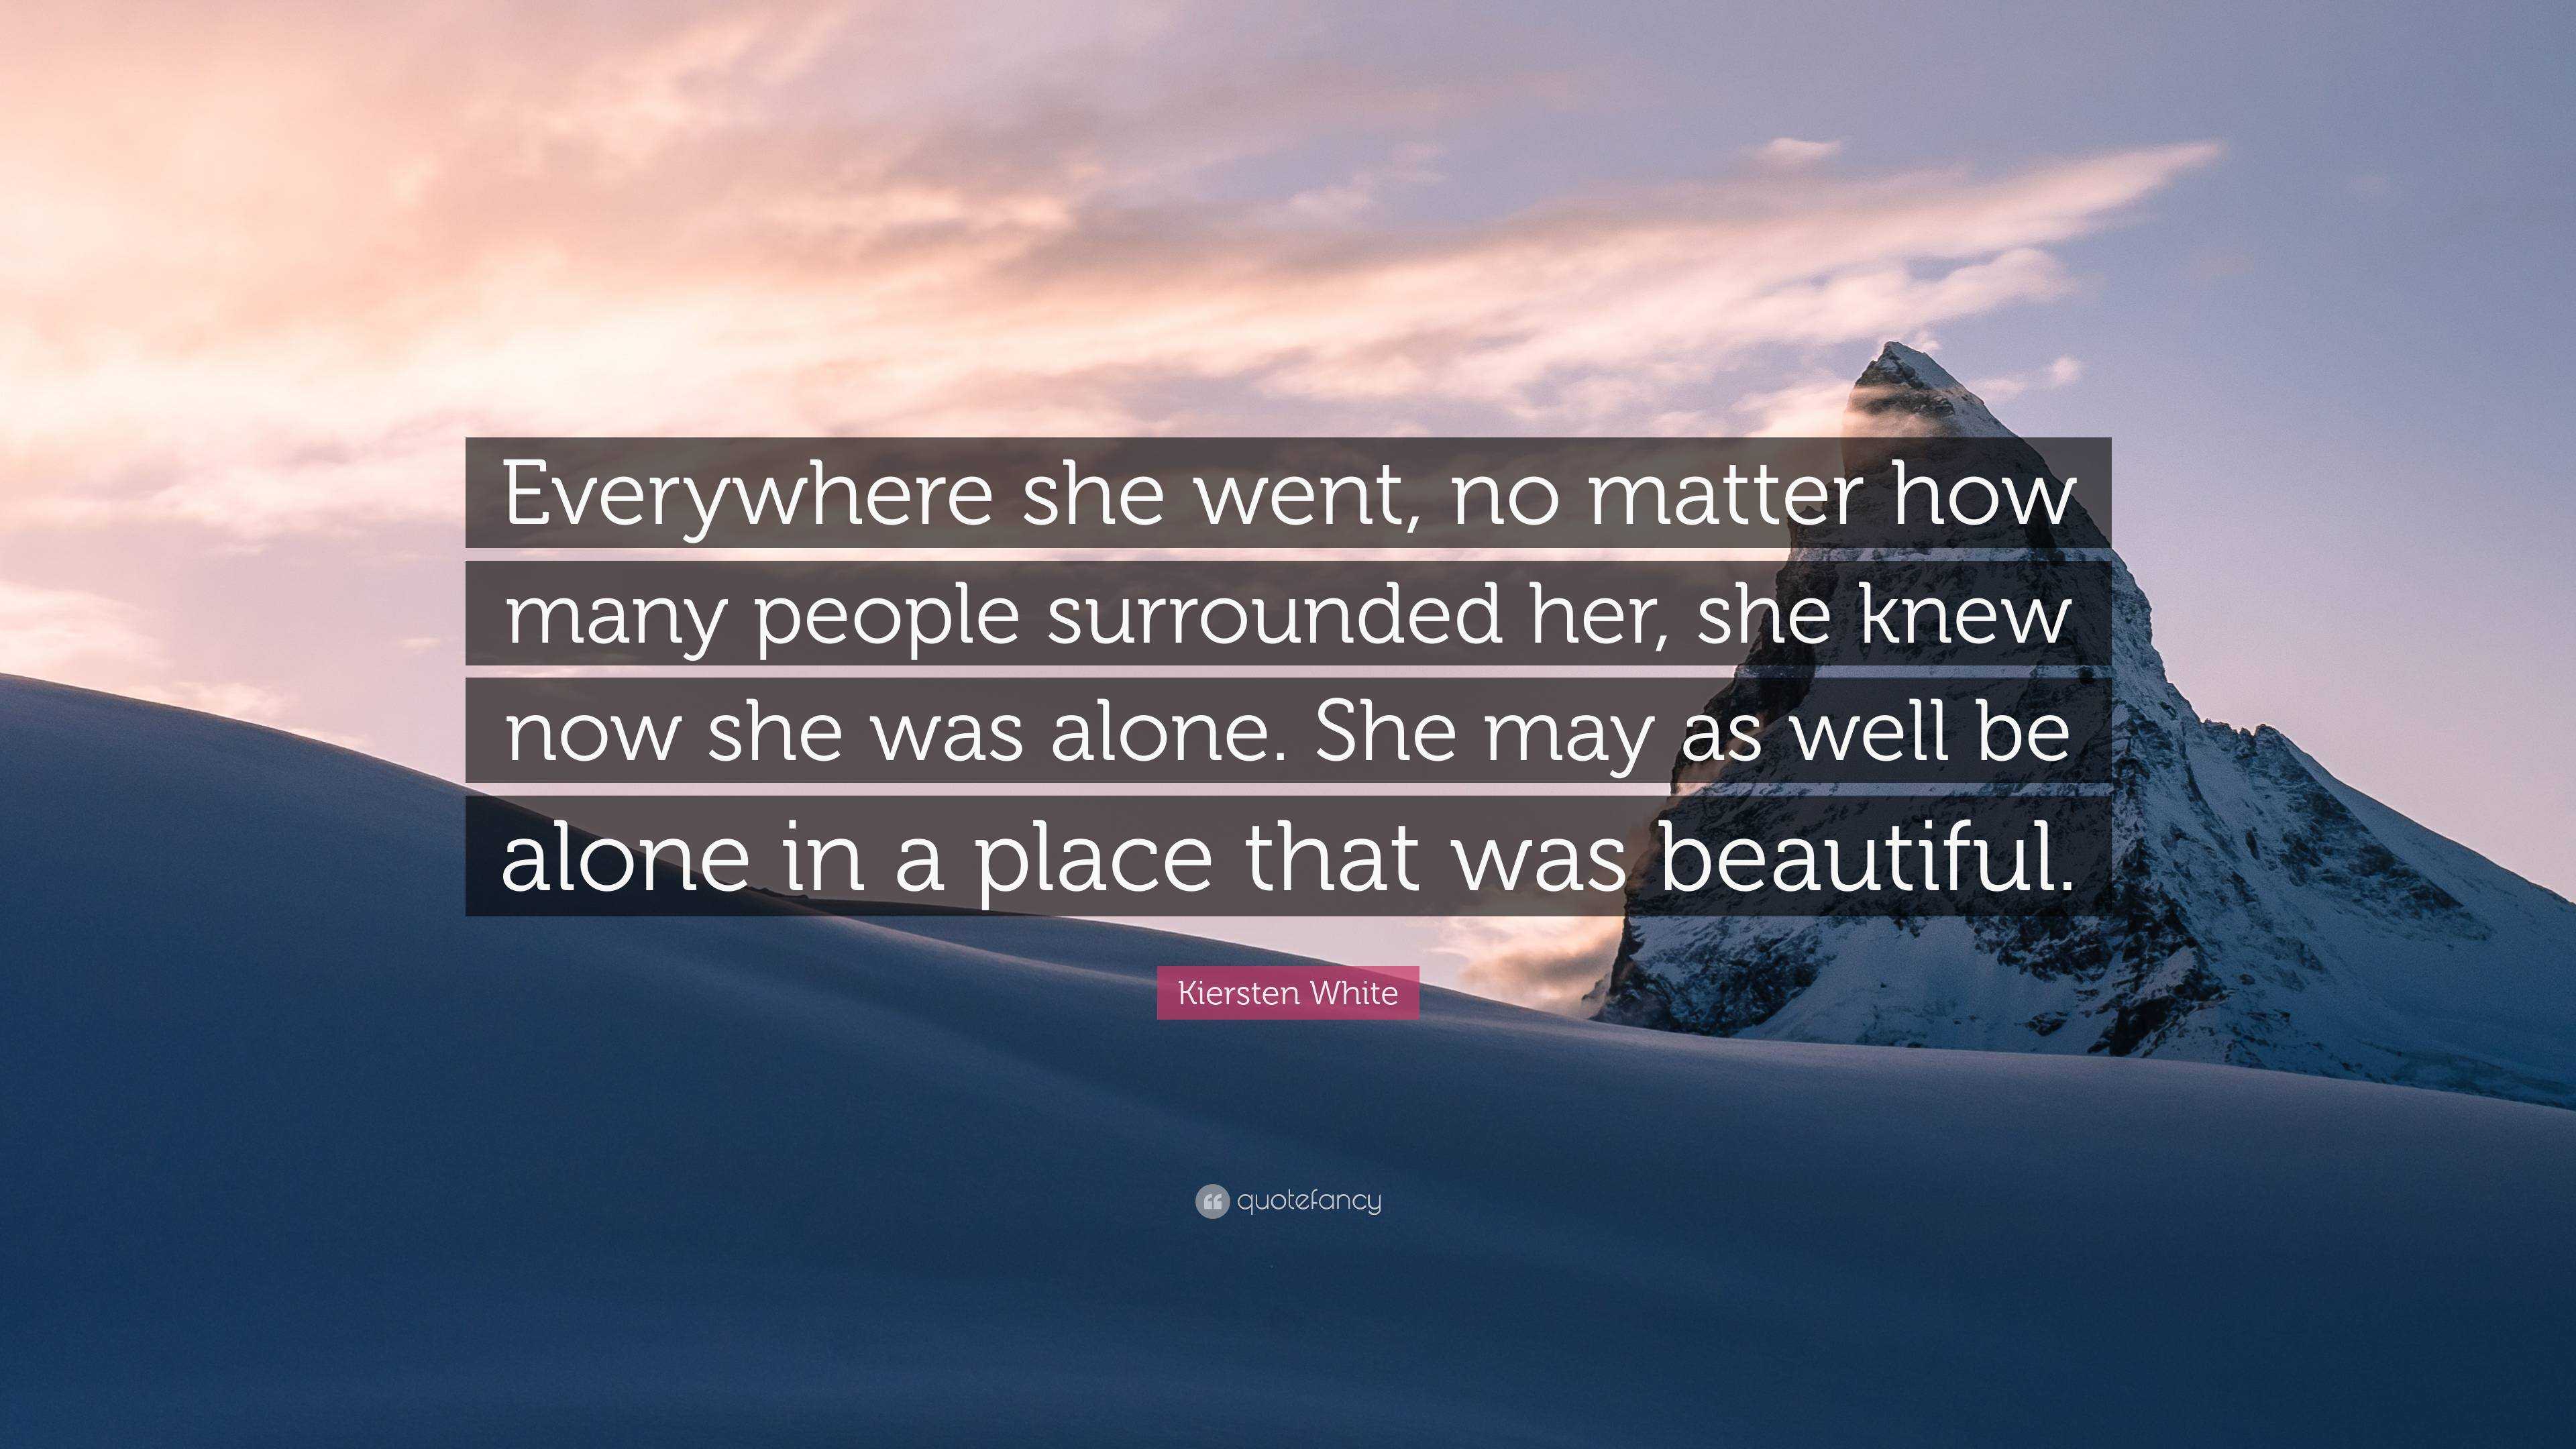 Kiersten White Quote Everywhere She Went No Matter How Many People Surrounded Her She Knew Now She Was Alone She May As Well Be Alone In A